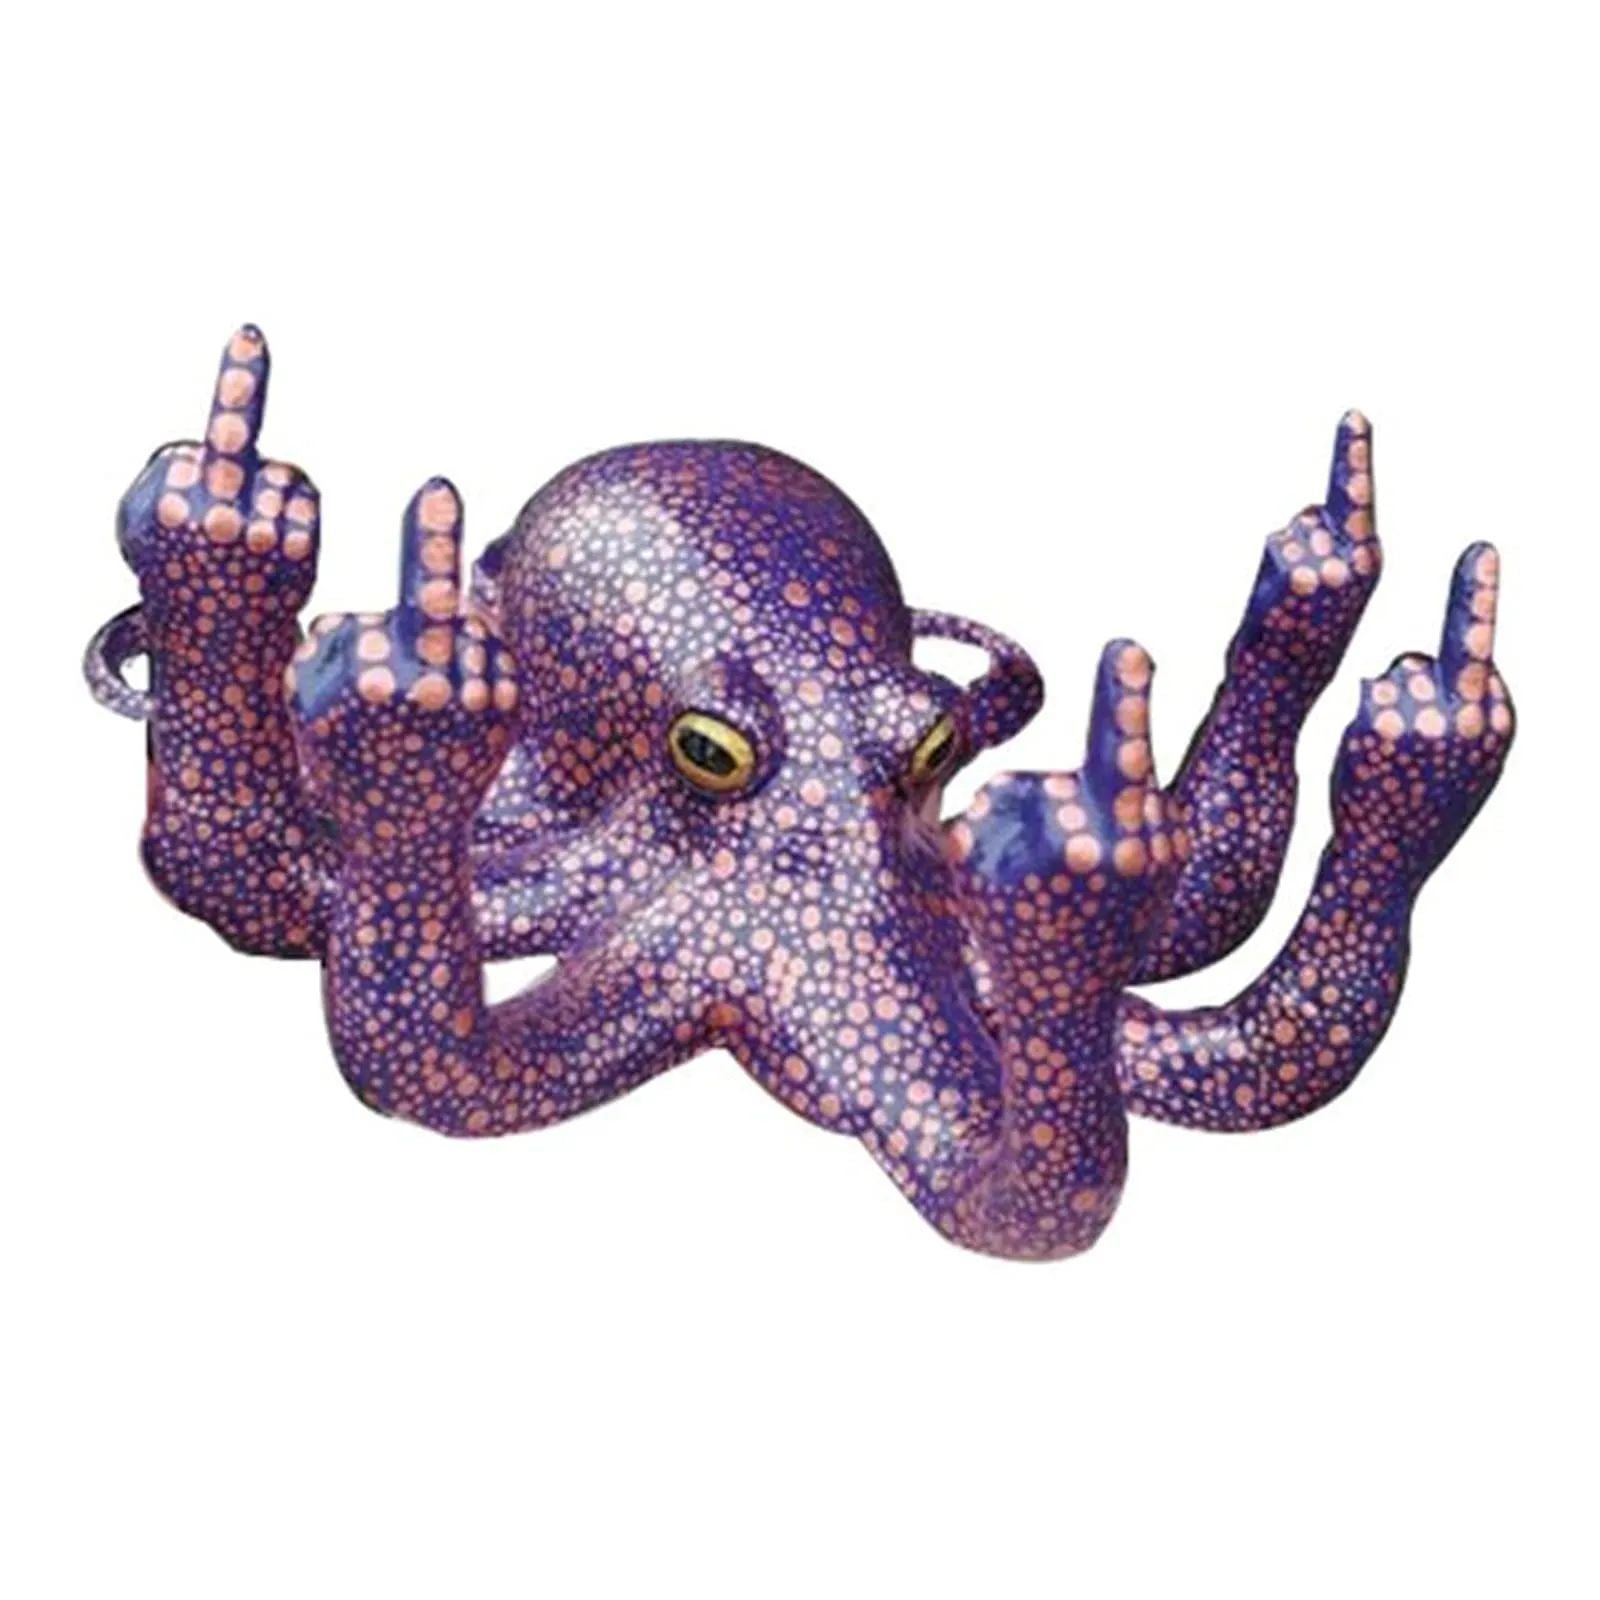 Fucktopus | The Middle Finger Octopus